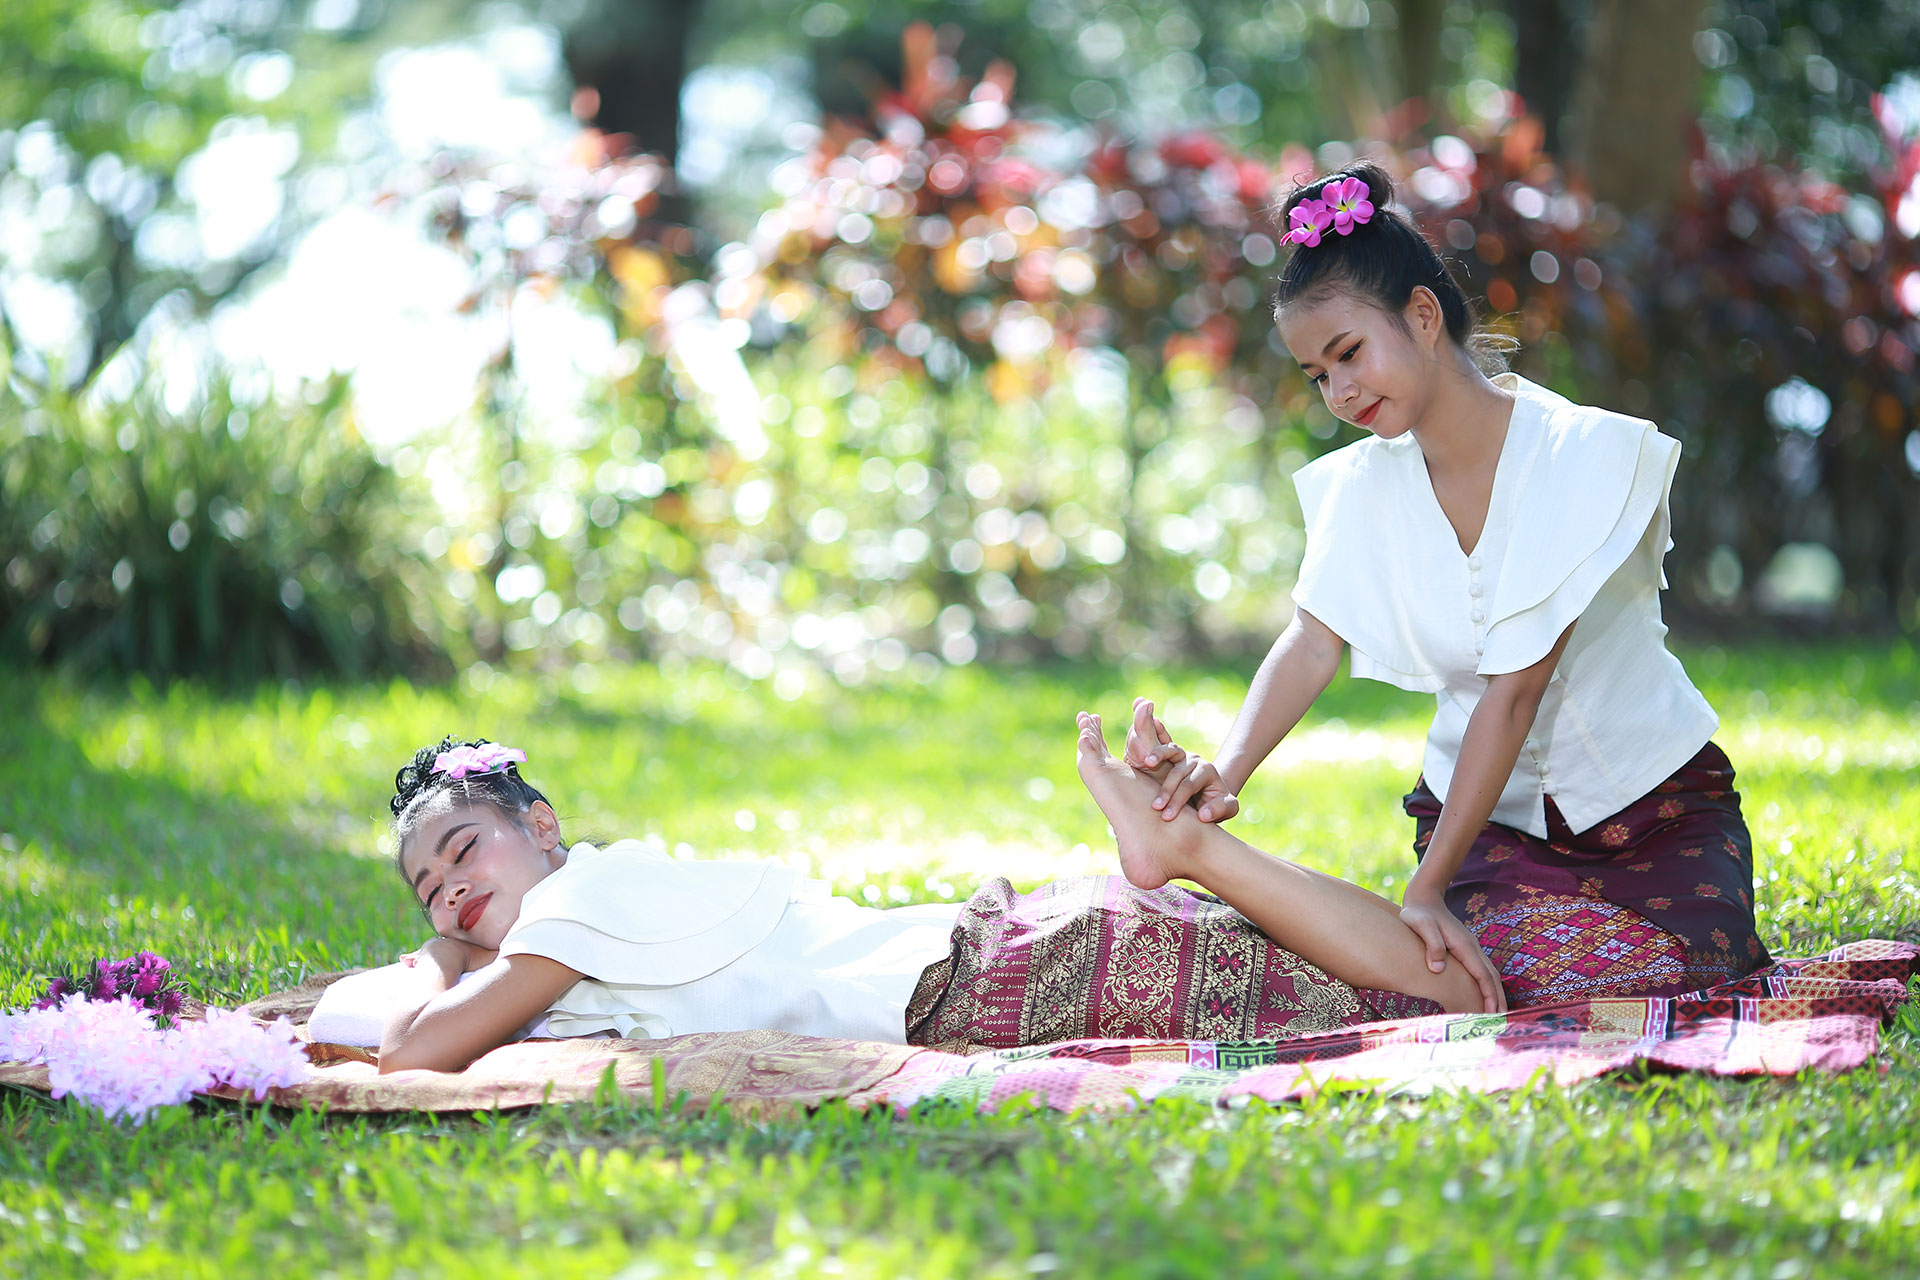 Relaxing massage with Schada Thaimassage with Foot, Neck and Head program